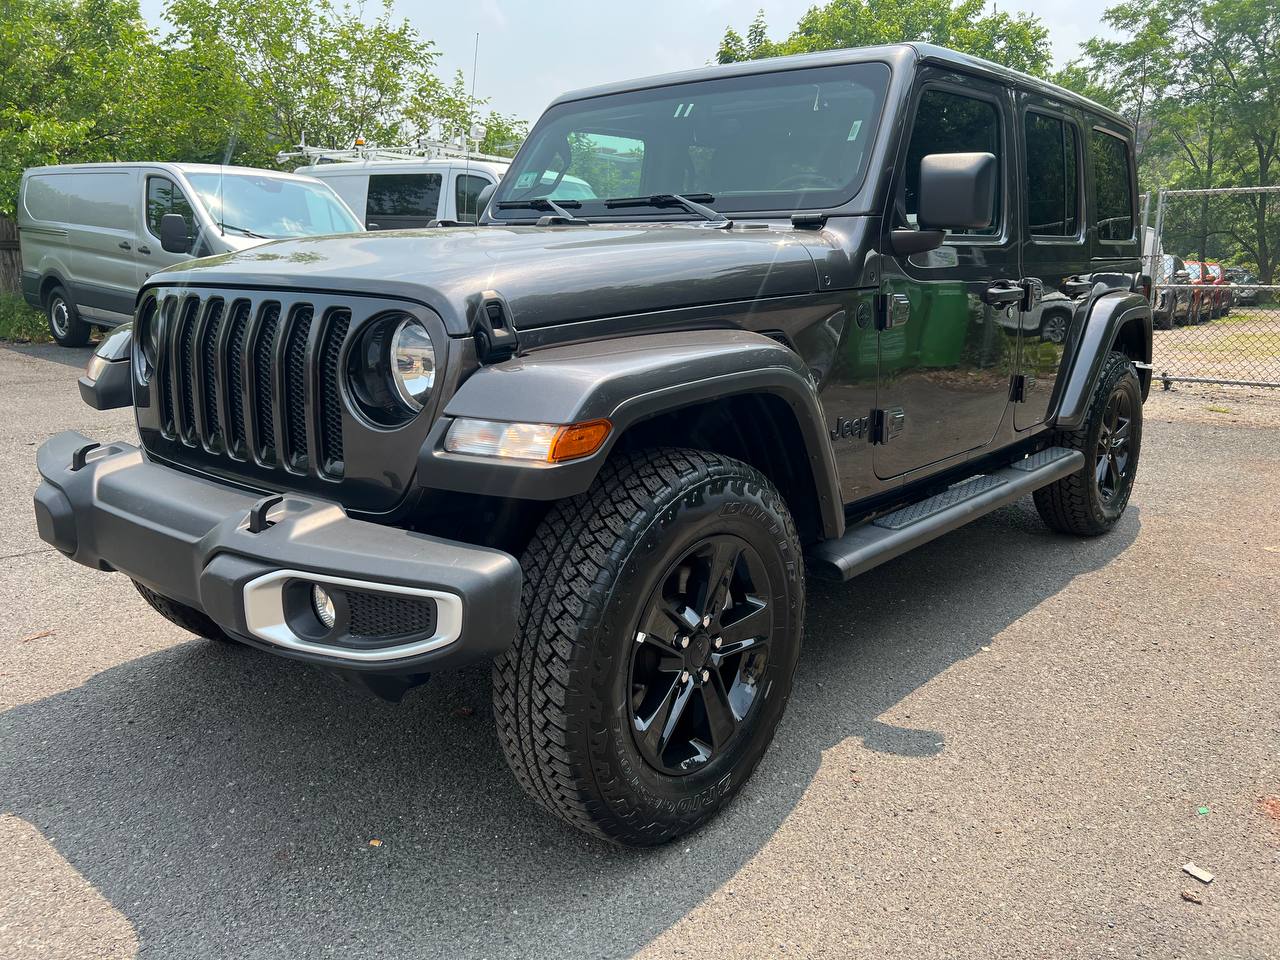 Used Car - 2021 Jeep Wrangler Unlimited Sahara 4x4 for Sale in Staten Island, NY